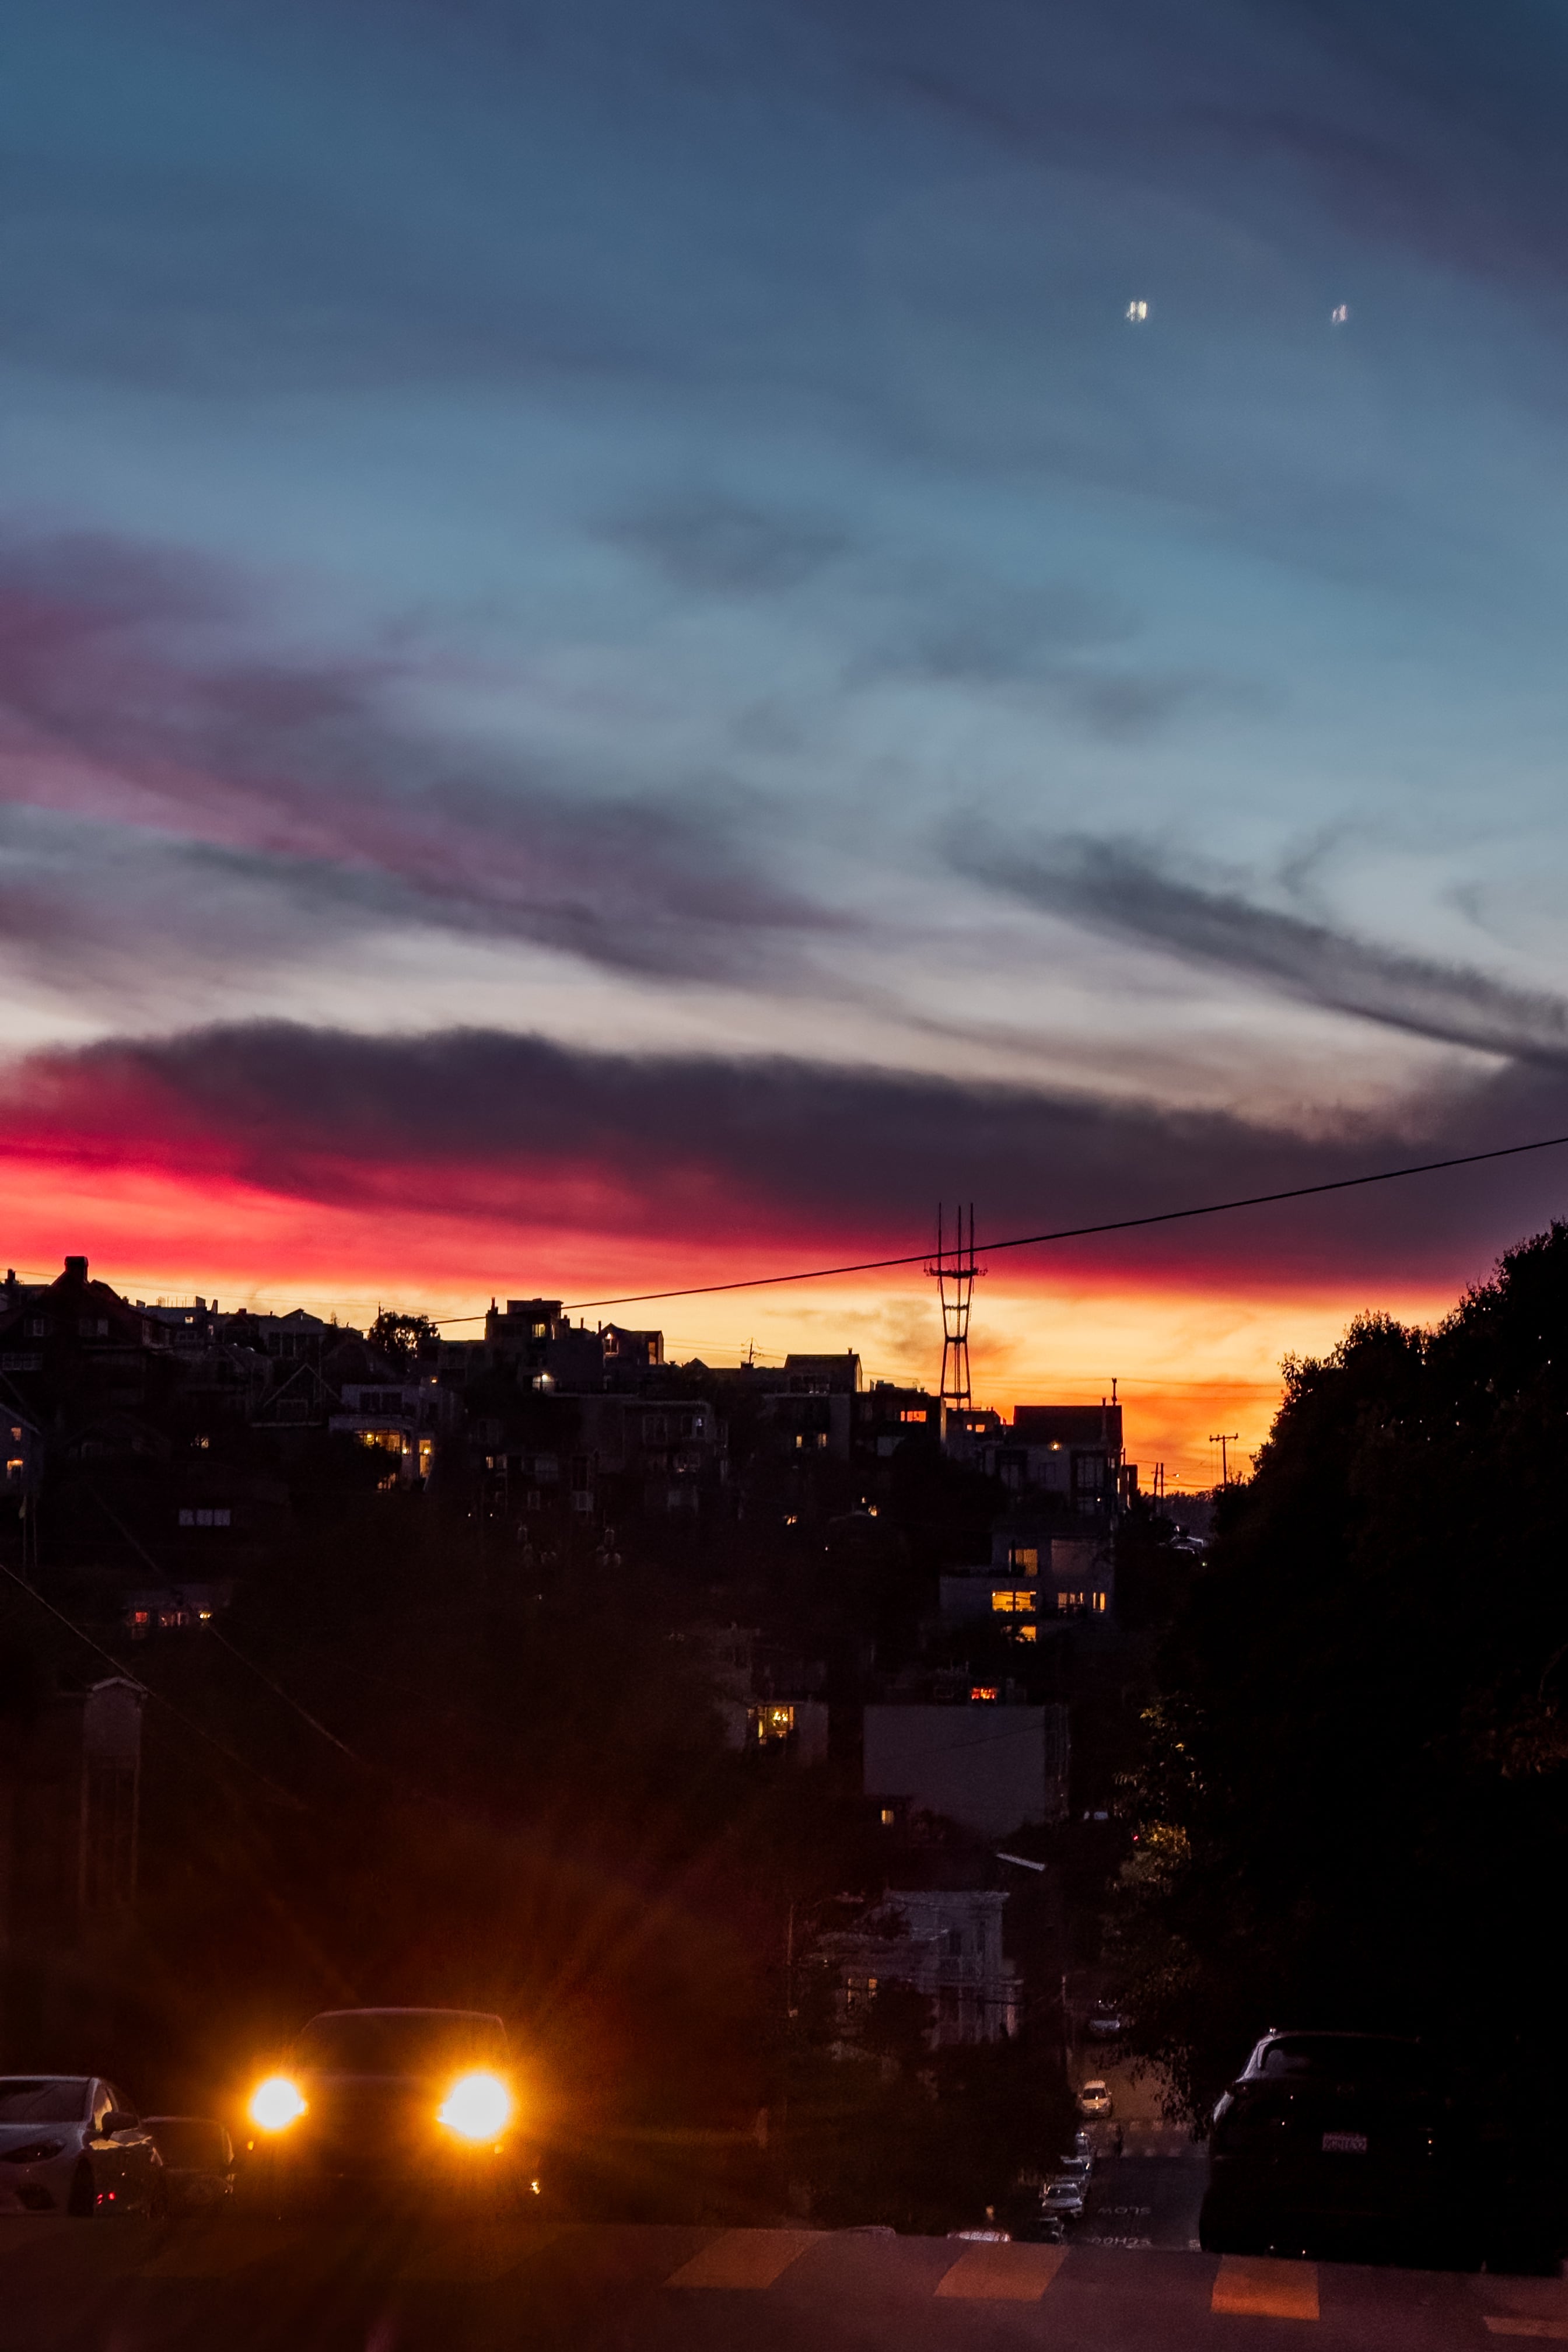 A sunset view of Sutro Tower in the distance in San Francisco, taken from high on a hill in Potrero Hill at dusk with orange and purple skies